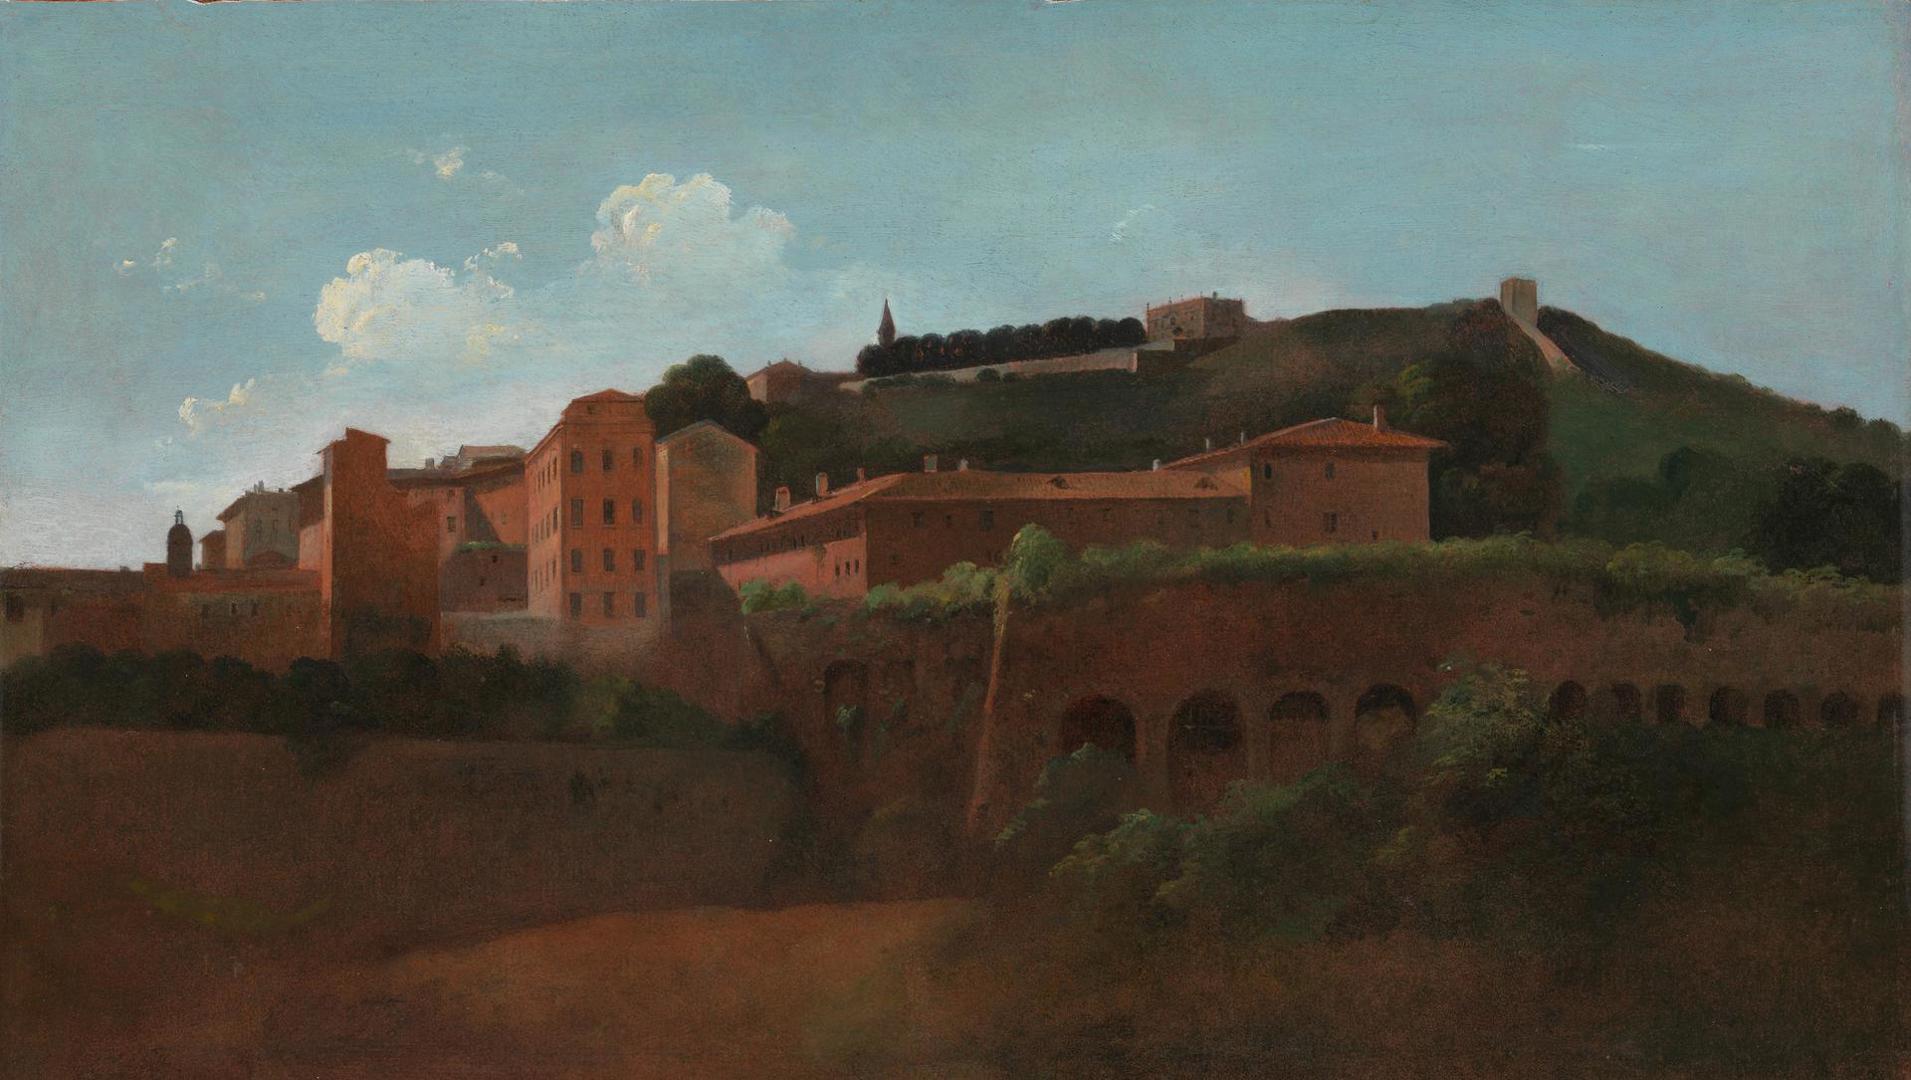 The Fourvière Hill at Lyon by British (?)